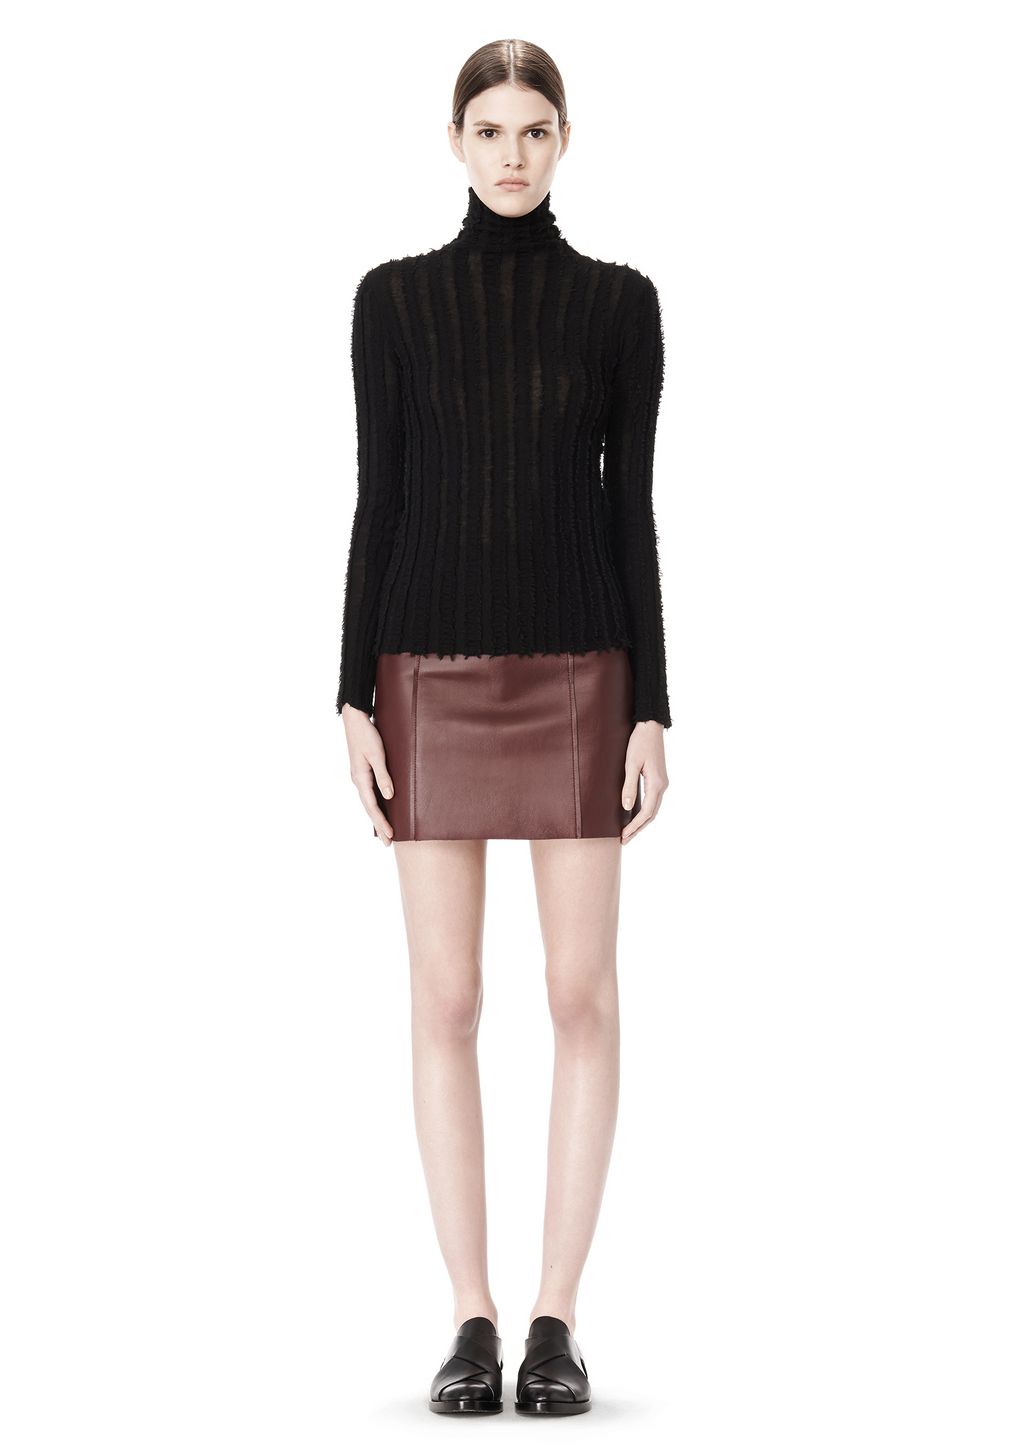 Alexander Wang ‎MERINO STRIPED TURTLENECK PULLOVER ‎ ‎TOP‎ |Official Site